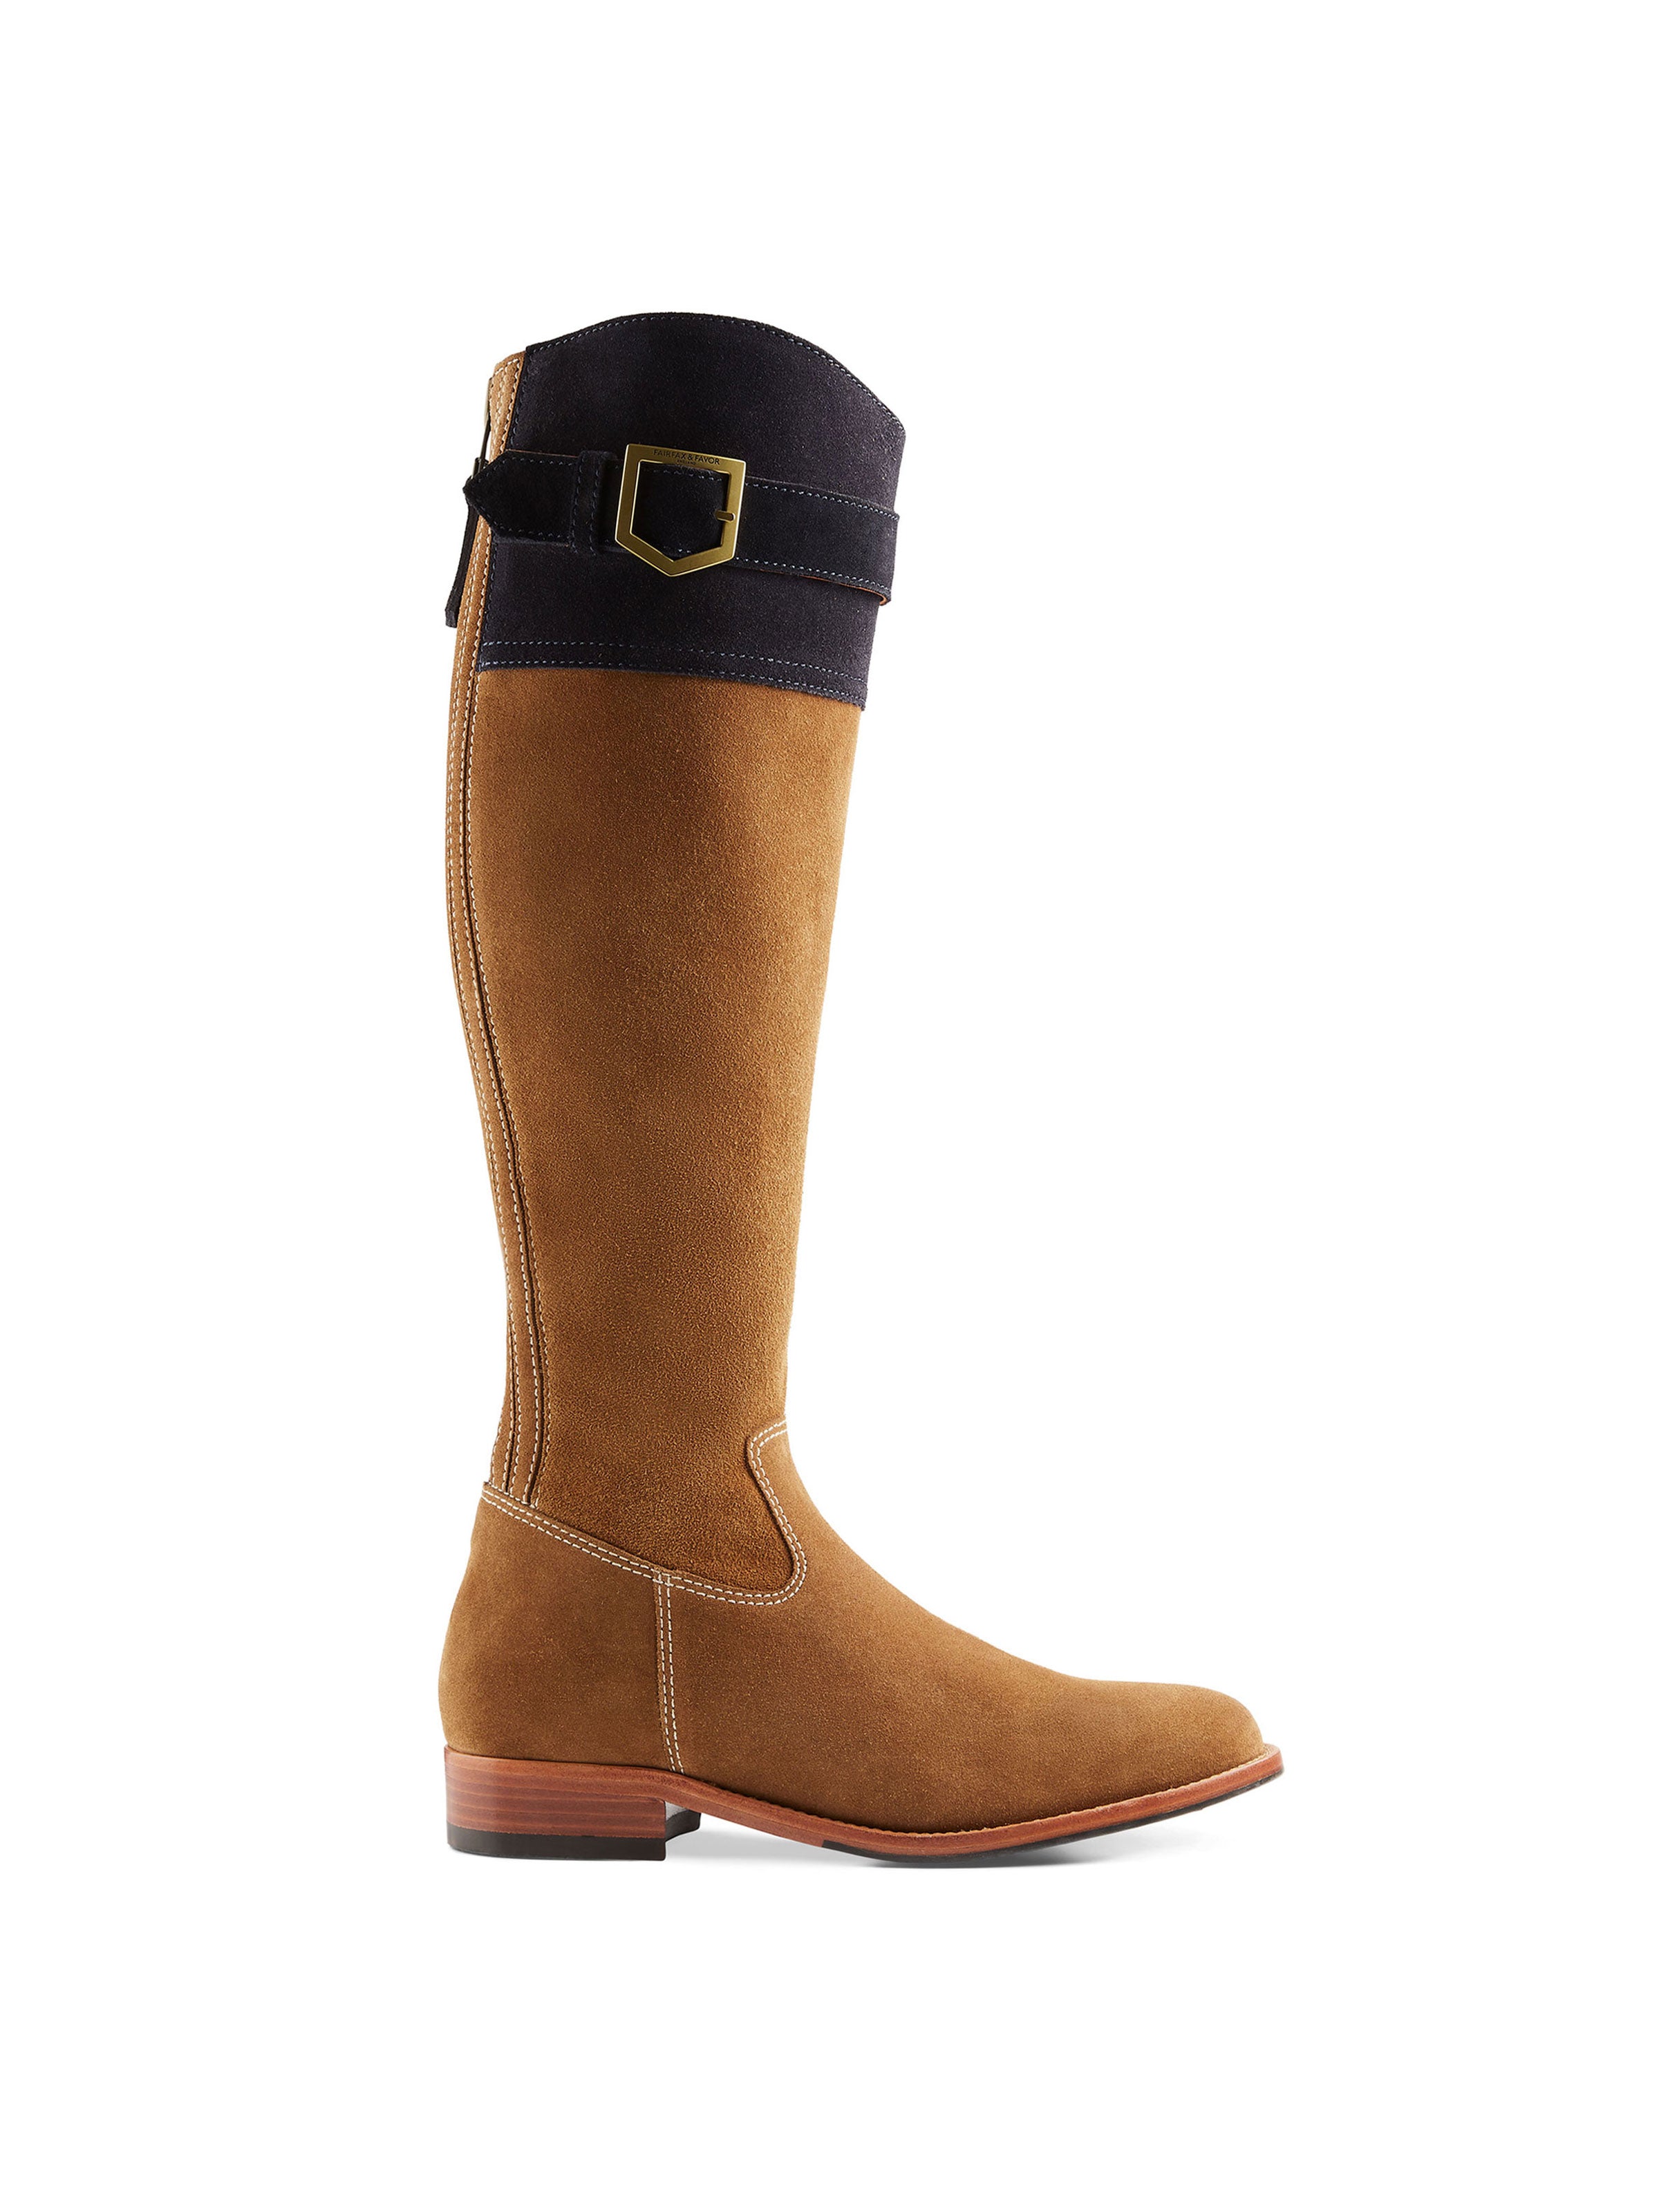 The Olympia - Women's Boot - Tan & Navy Suede | Fairfax & Favor